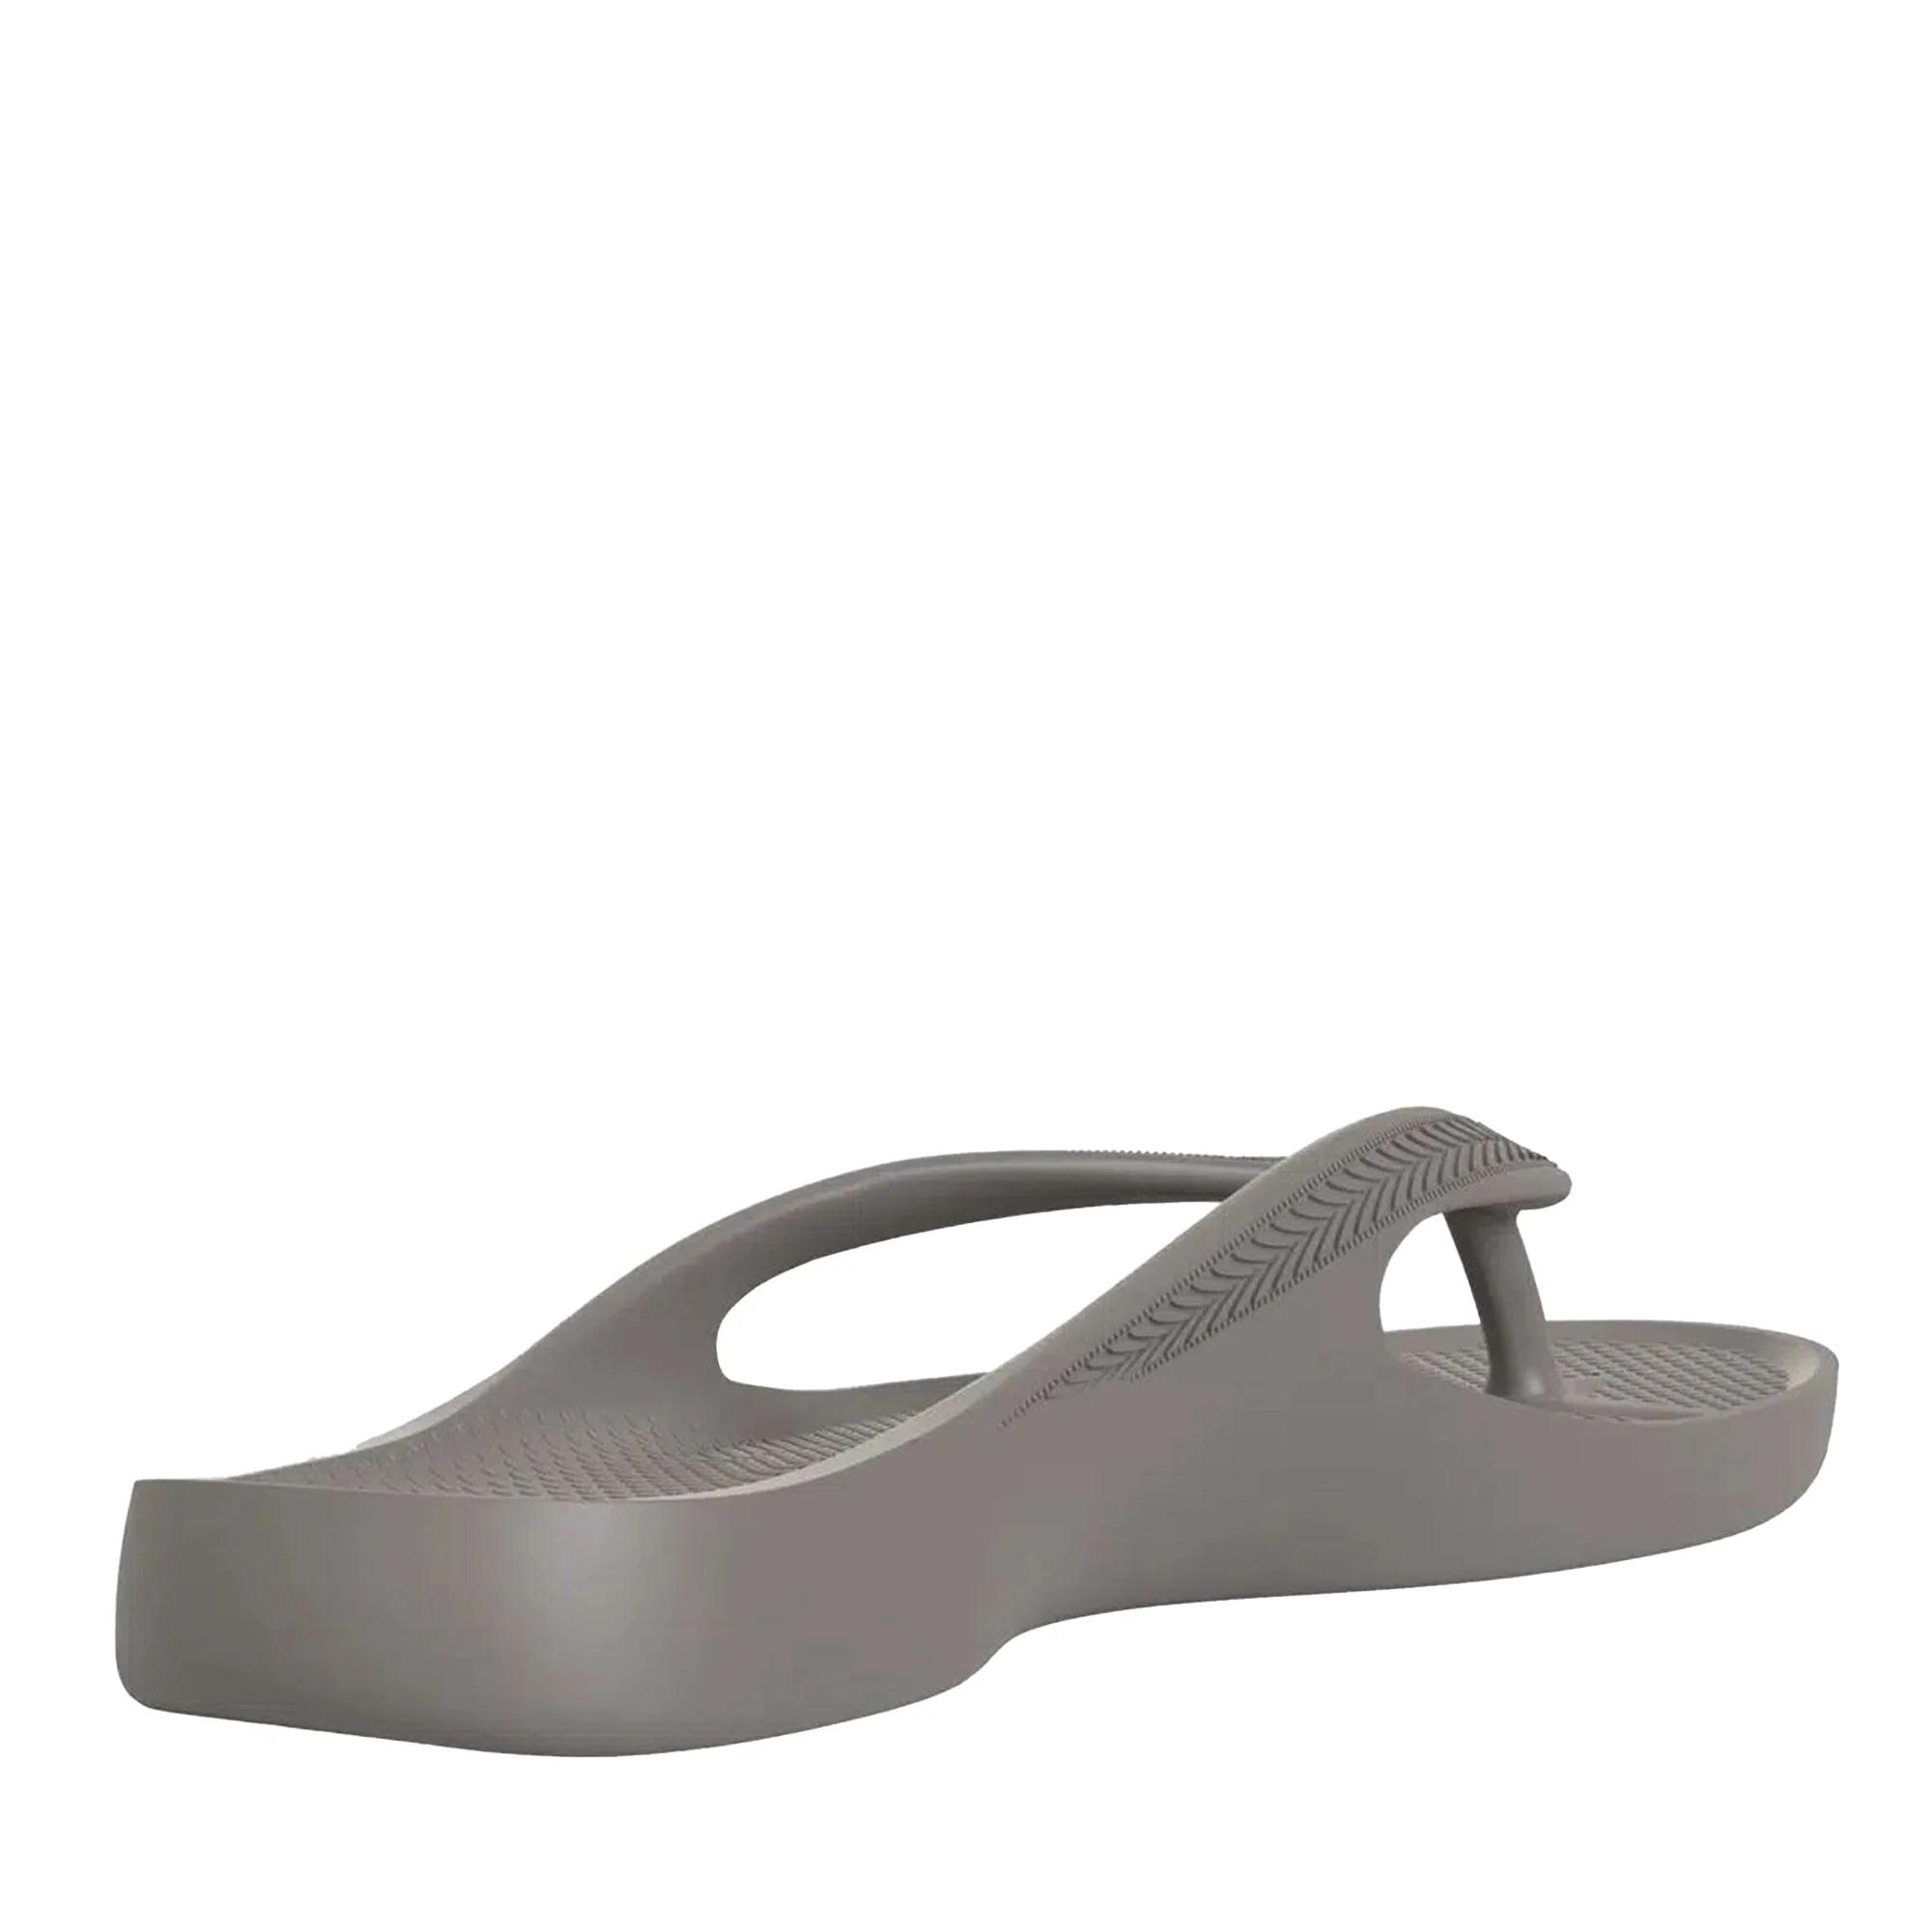 The Best Arch Support Thongs Australia